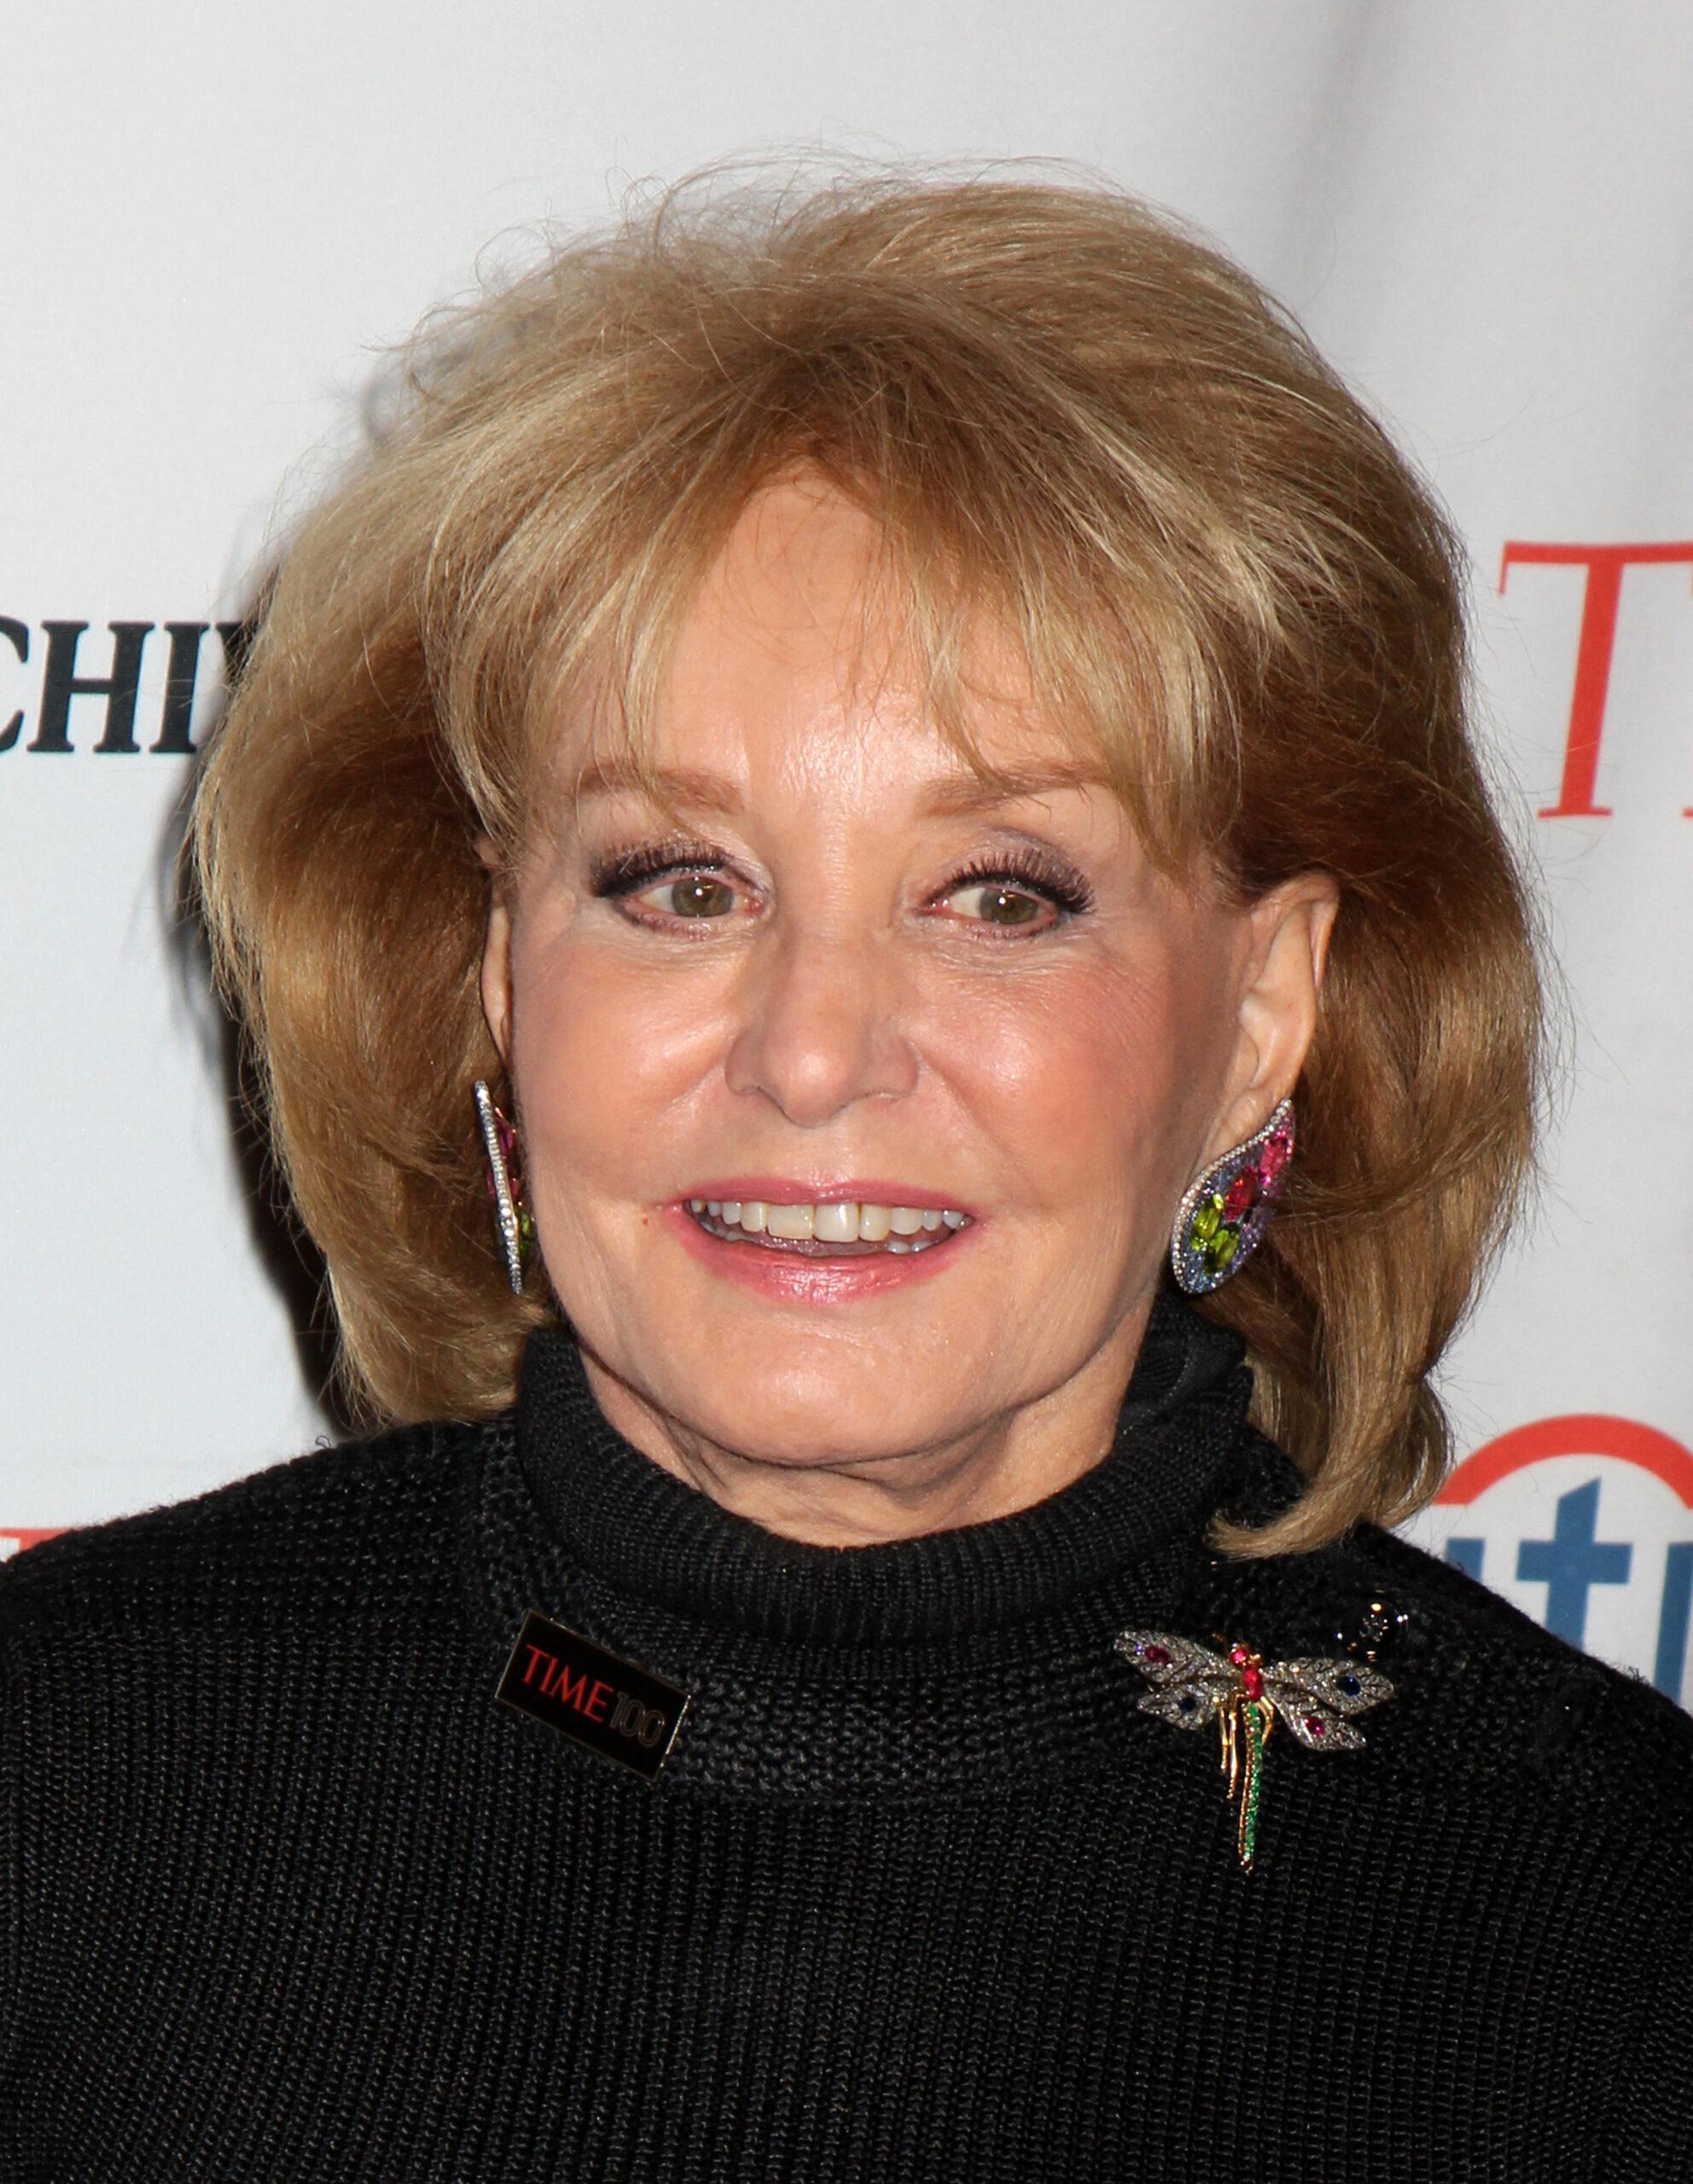 Barbara Walters, legendary news anchor and creator of “The View” and host on the “Today” show has died at age 93 